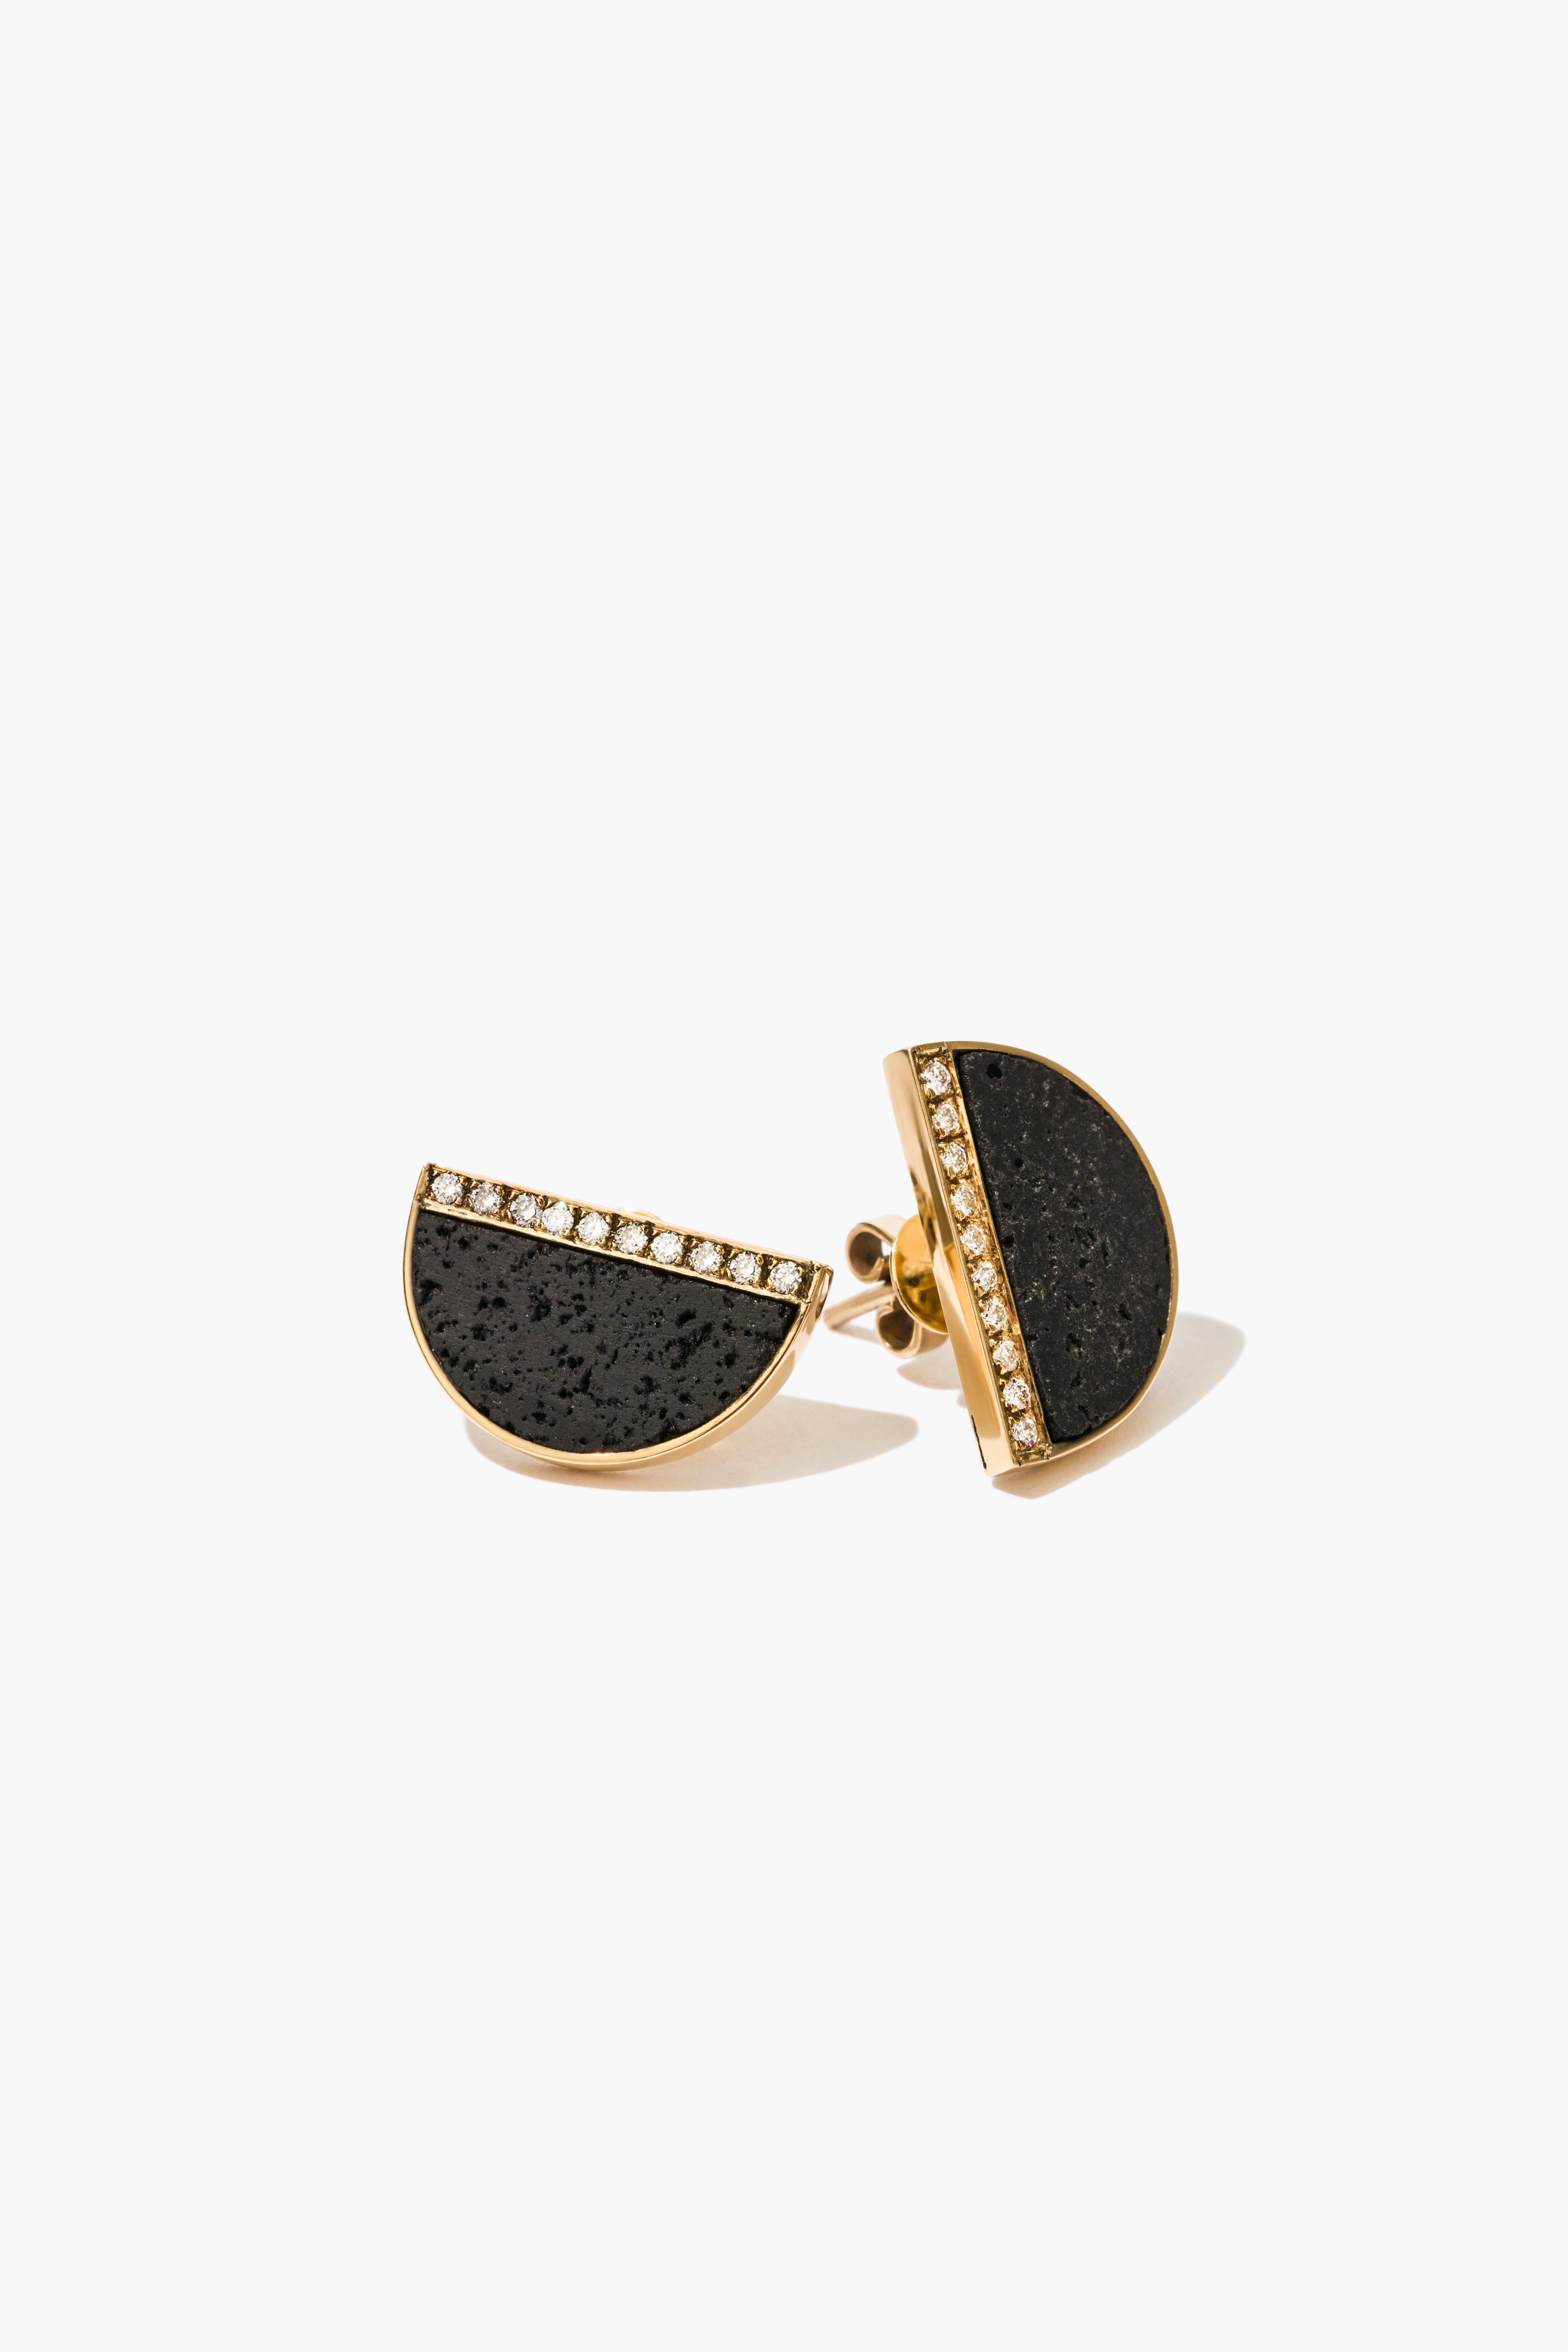 Unexpected combination of Lava stone from Mexico's Popocatepetl Volcano.
Recycled 14-Karat Gold and Shimmering White Diamonds.
Made by hand at our Mexico City atelier.
The collection juxtaposes bold and organic lines, invoking a dialogue through the